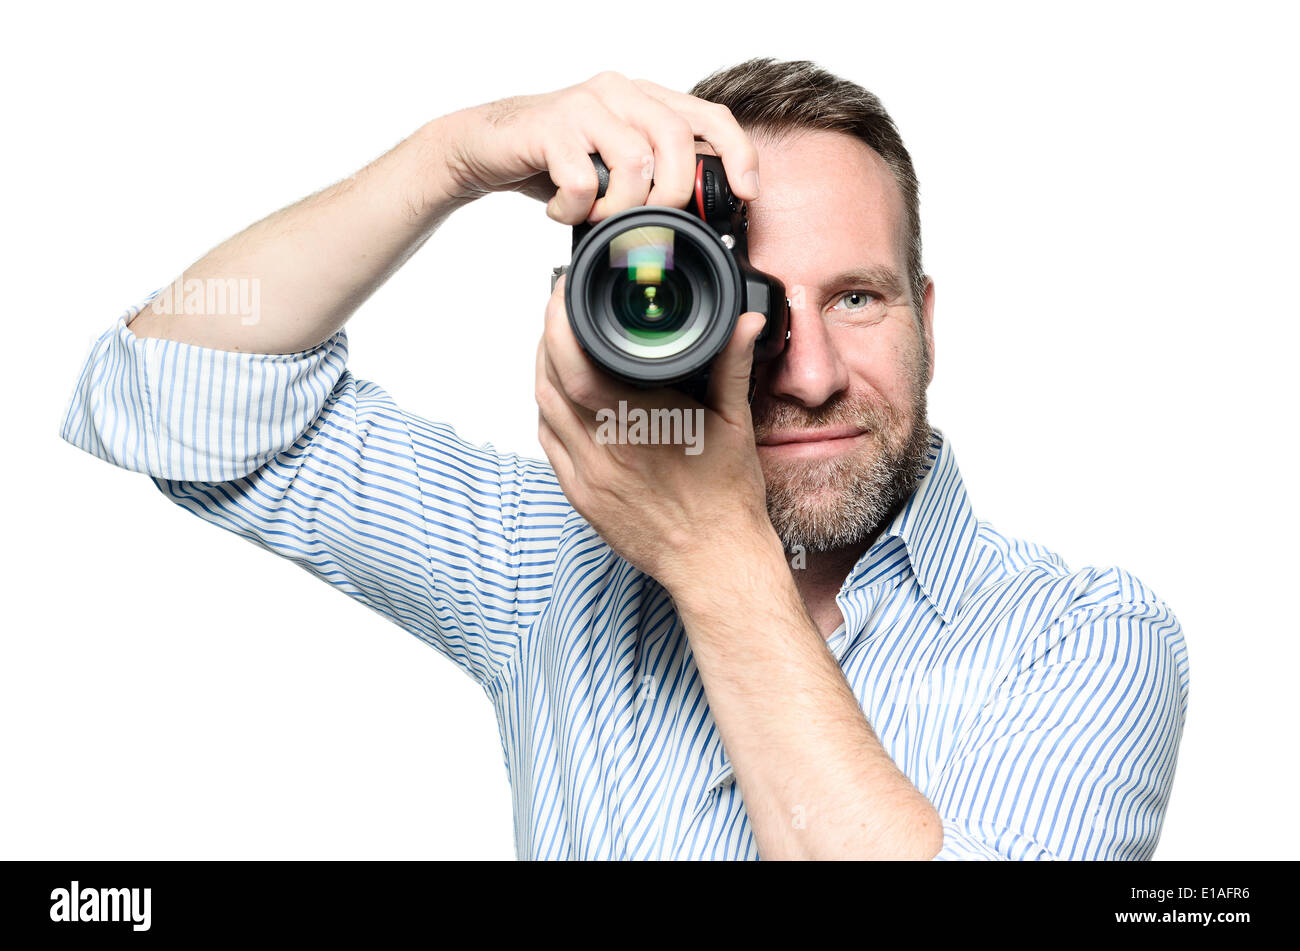 Male photographer focusing an image Stock Photo